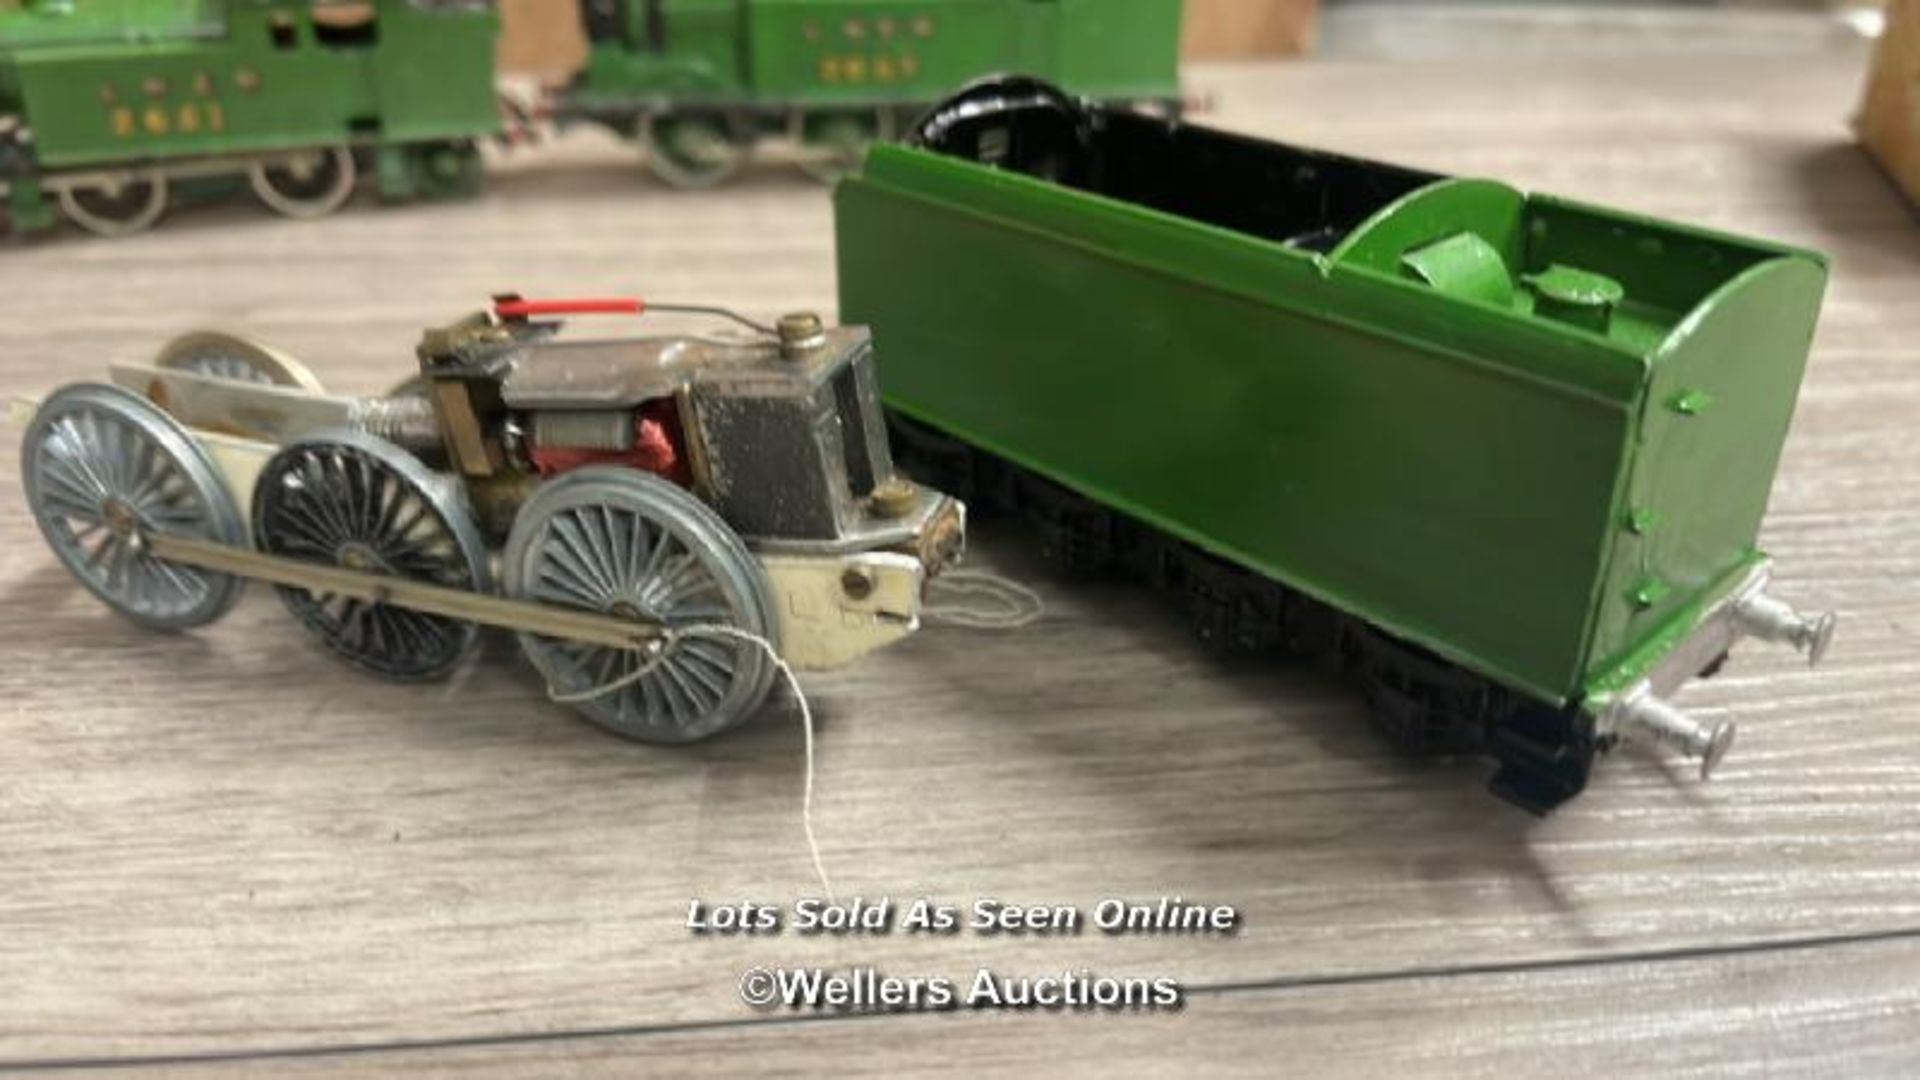 TWO METAL LOCOMOTIVES AND ONE TENDER, REPAINTED - Image 4 of 4